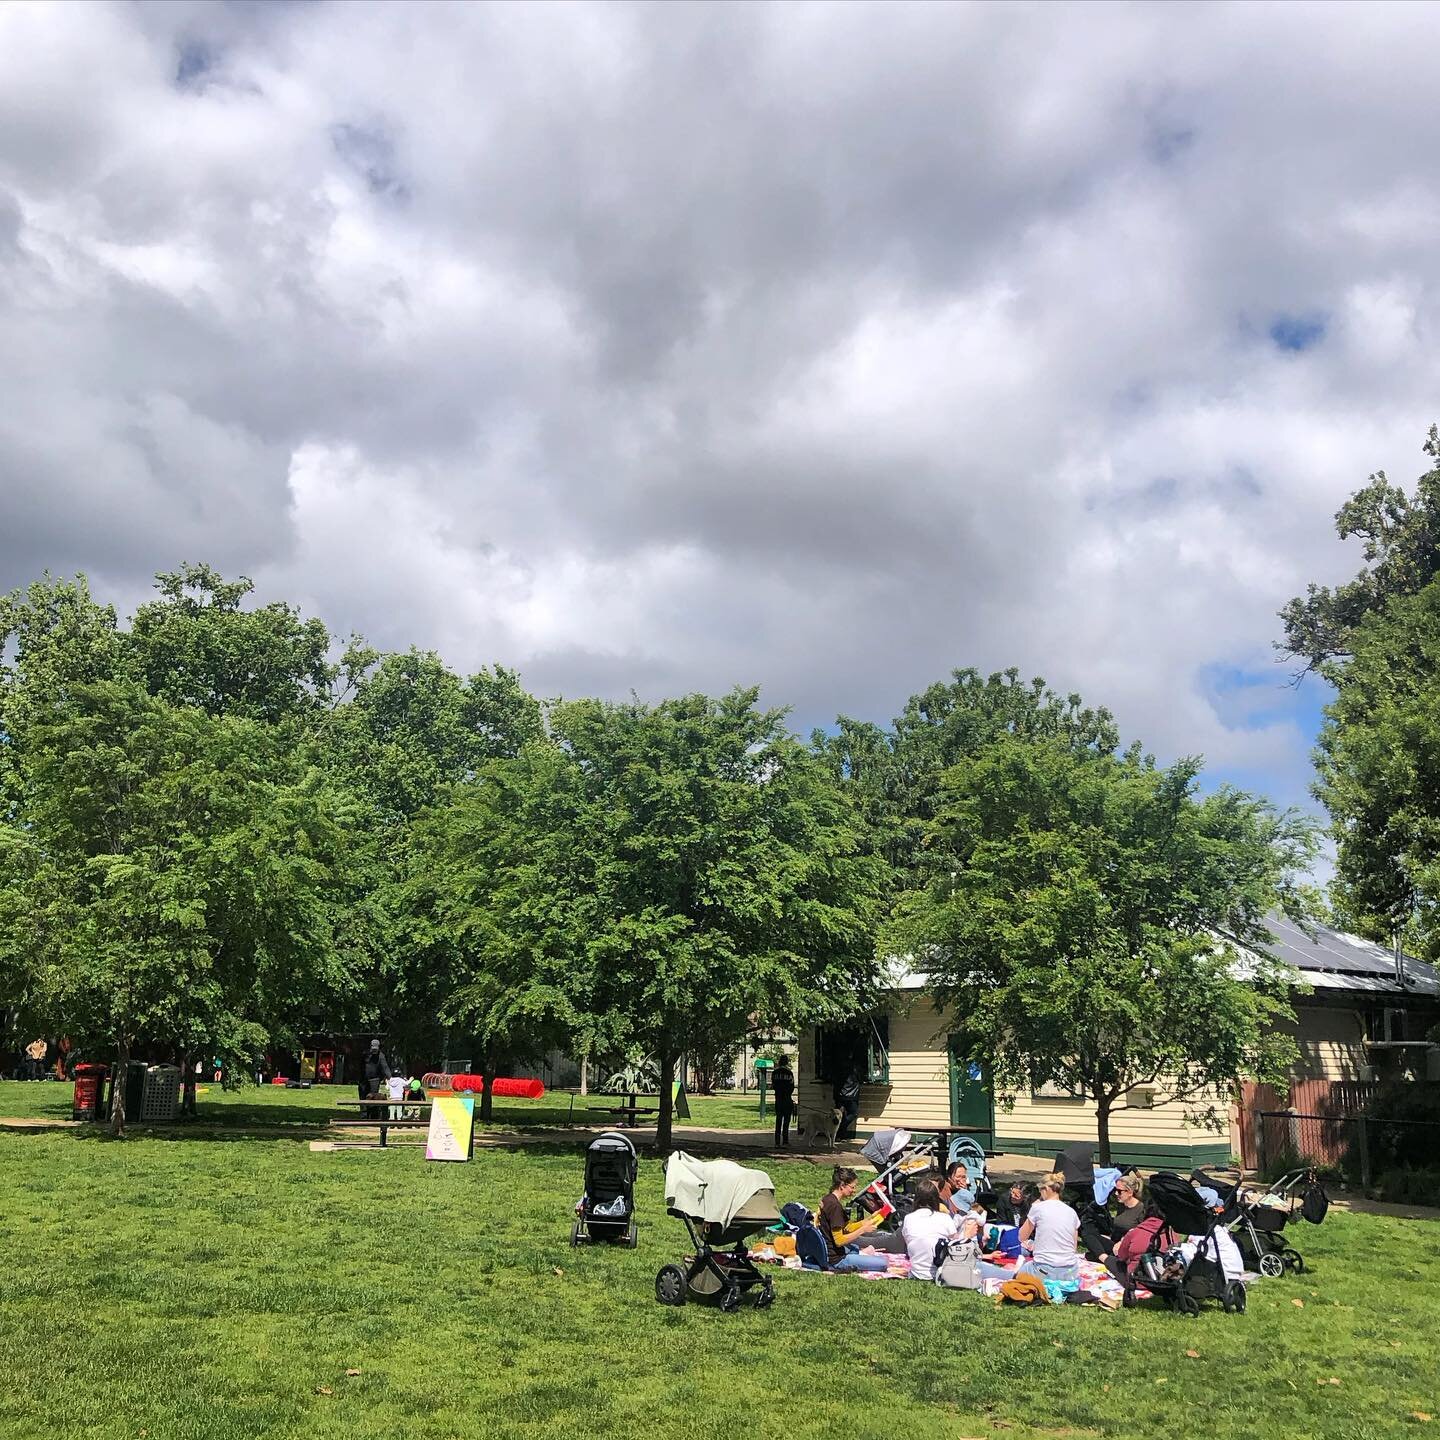 Here&rsquo;s a little happy snap from the park today.

A large group of new parents &lsquo;picnic-ing&rsquo; and catching up over coffee and lunch, a gym party over the back, kids on scooters and dog walkers waiting for coffee at the service window. 